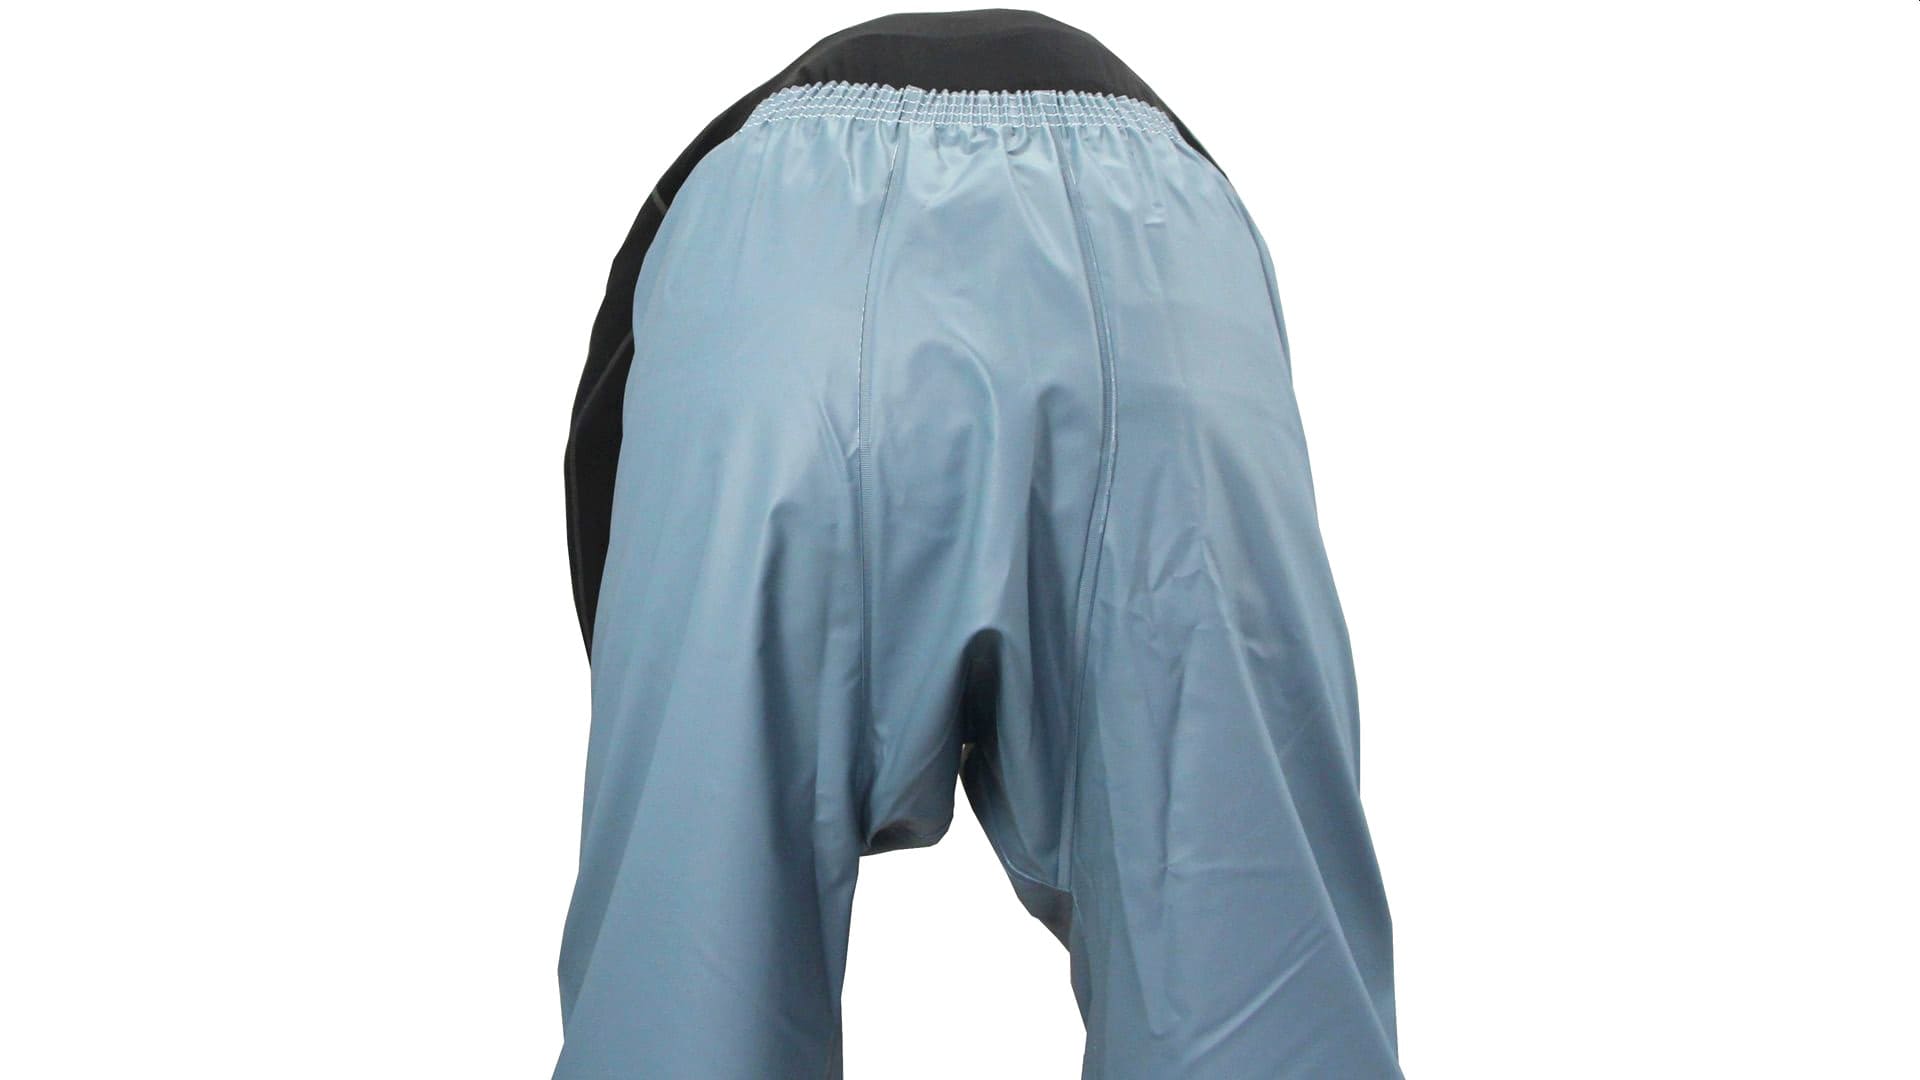 The buttocks are reinforced and tear-resistant.